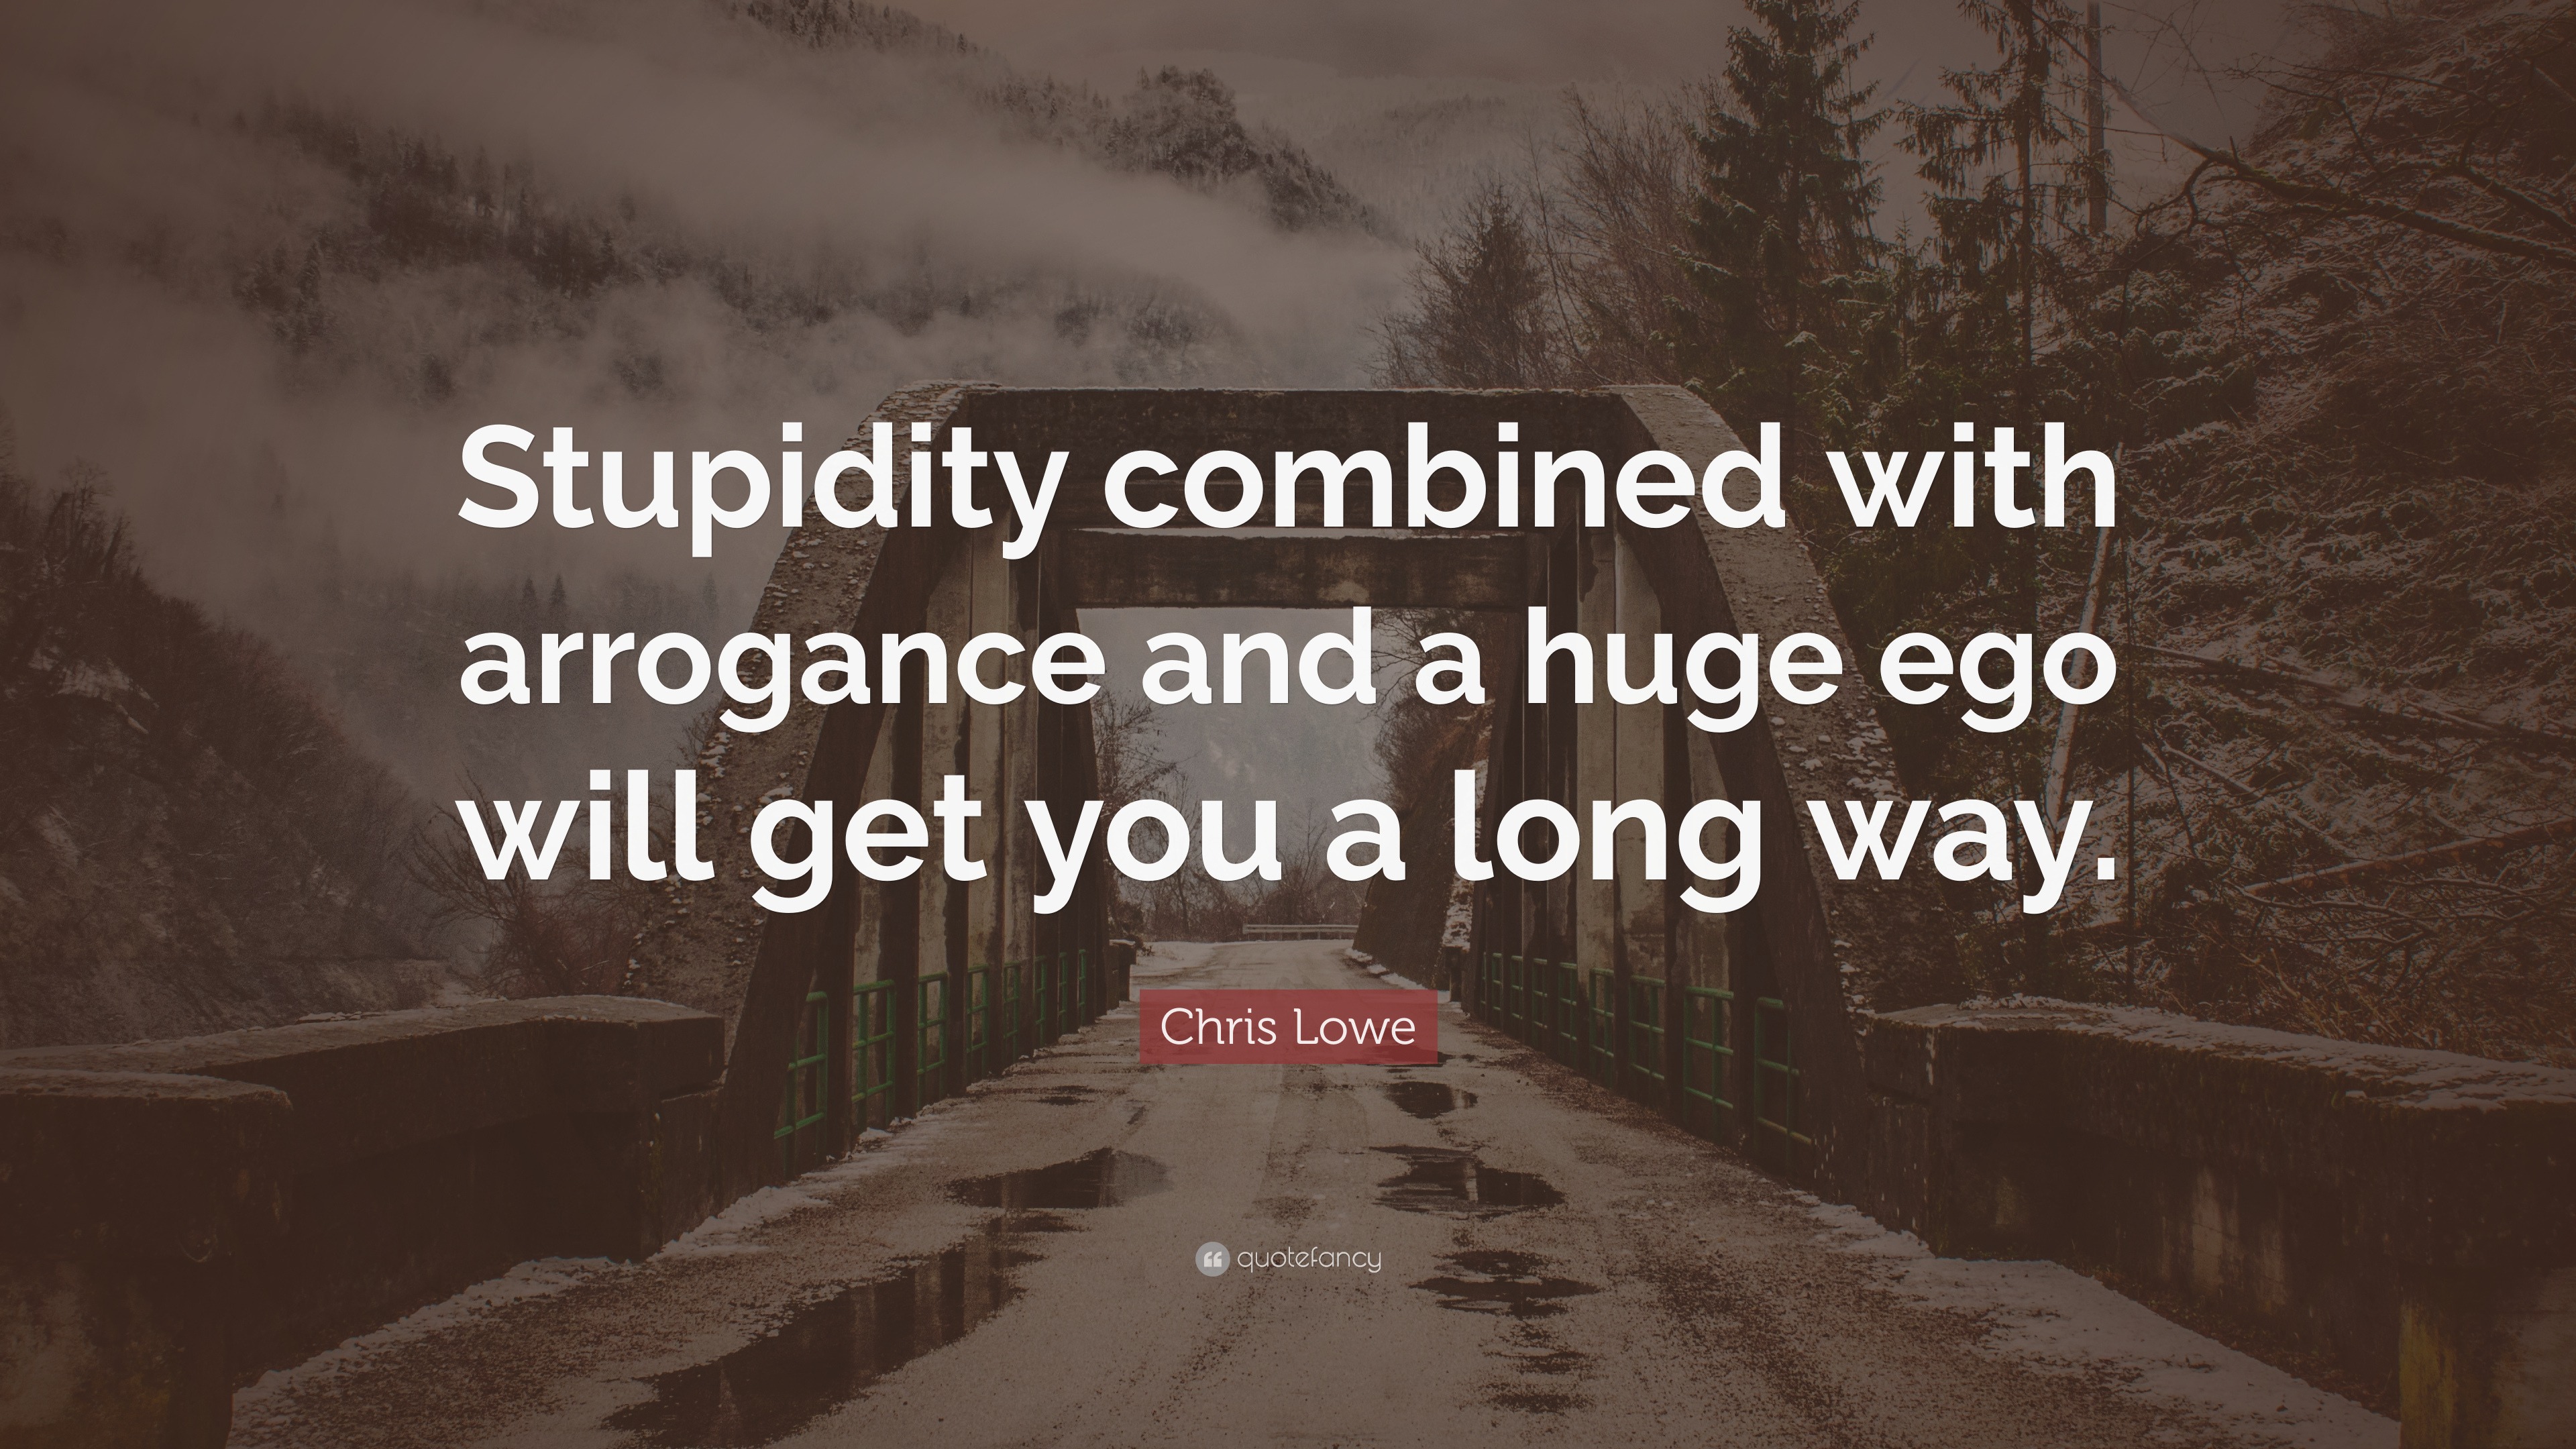 Chris Lowe Quote: “Stupidity combined with arrogance and a huge ego